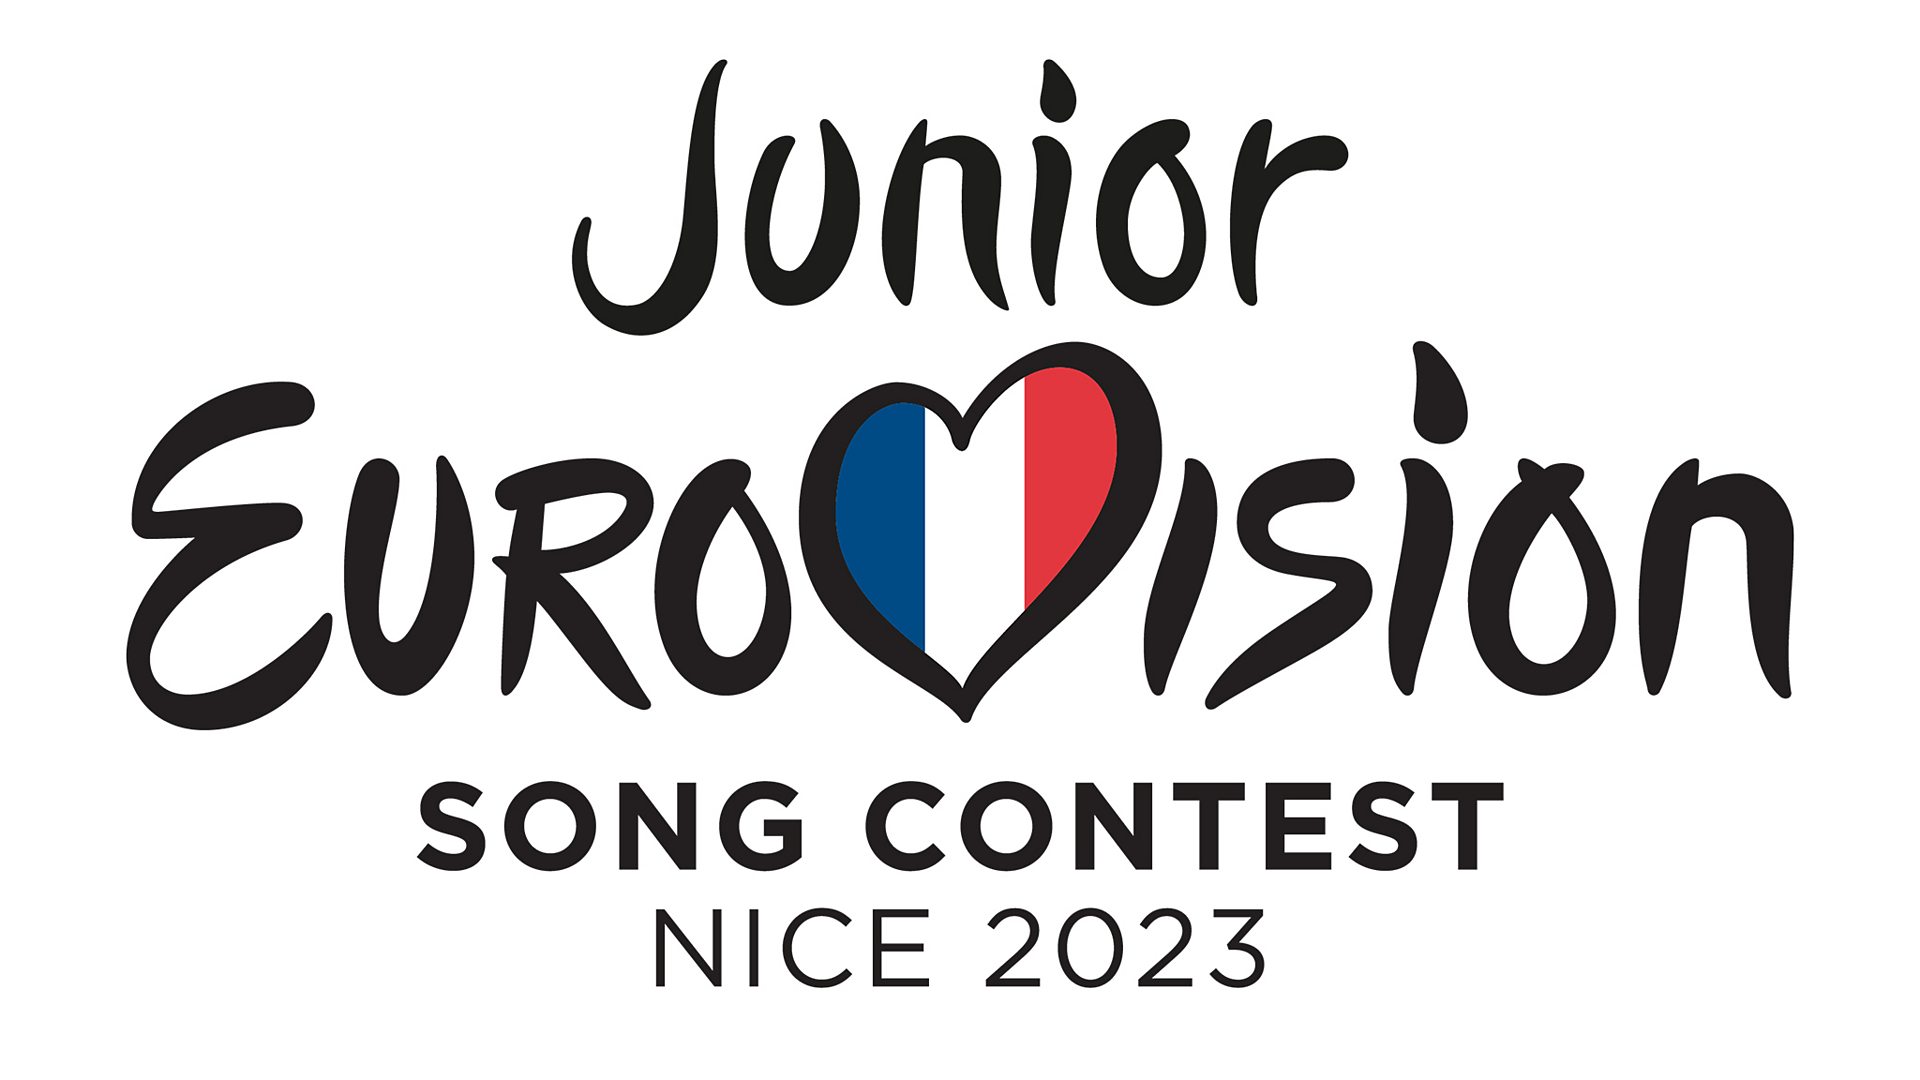 The BBC will broadcast the 2023 Junior Eurovision Song Contest live